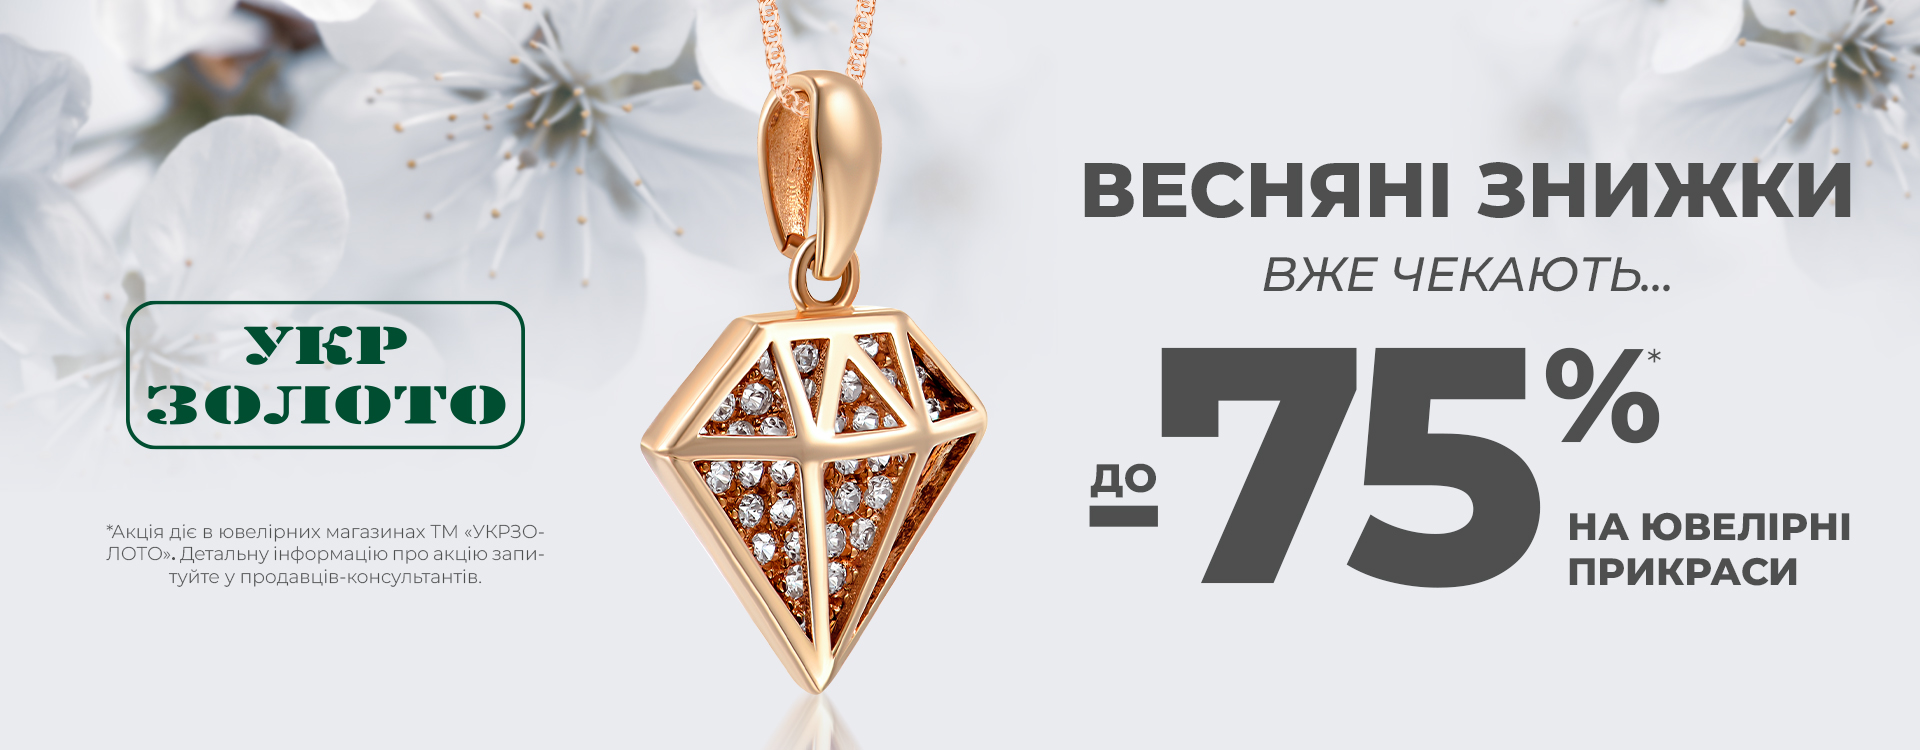 Buy jewelry with discounts up to - 75%